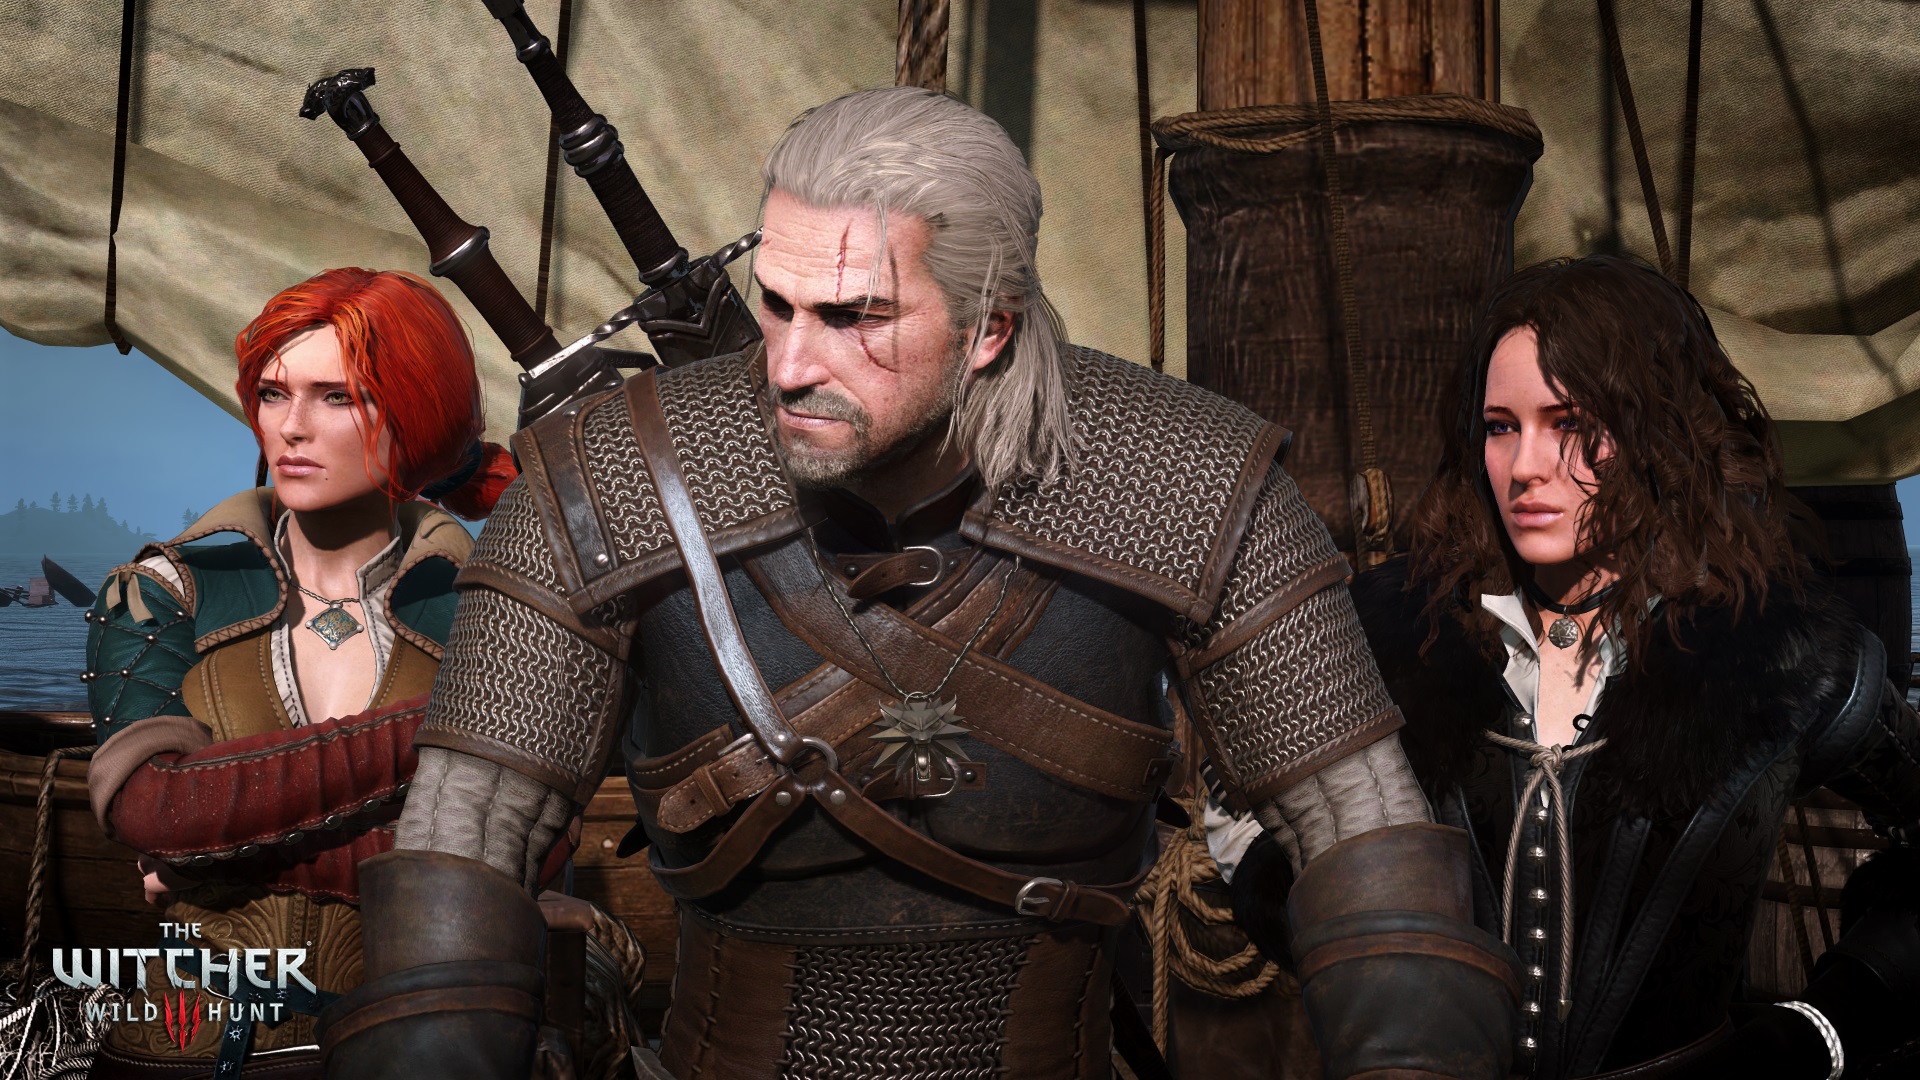 “The Witcher 3” Comes With Thank You Letter - A Sweet Gesture for Supporting Their Work